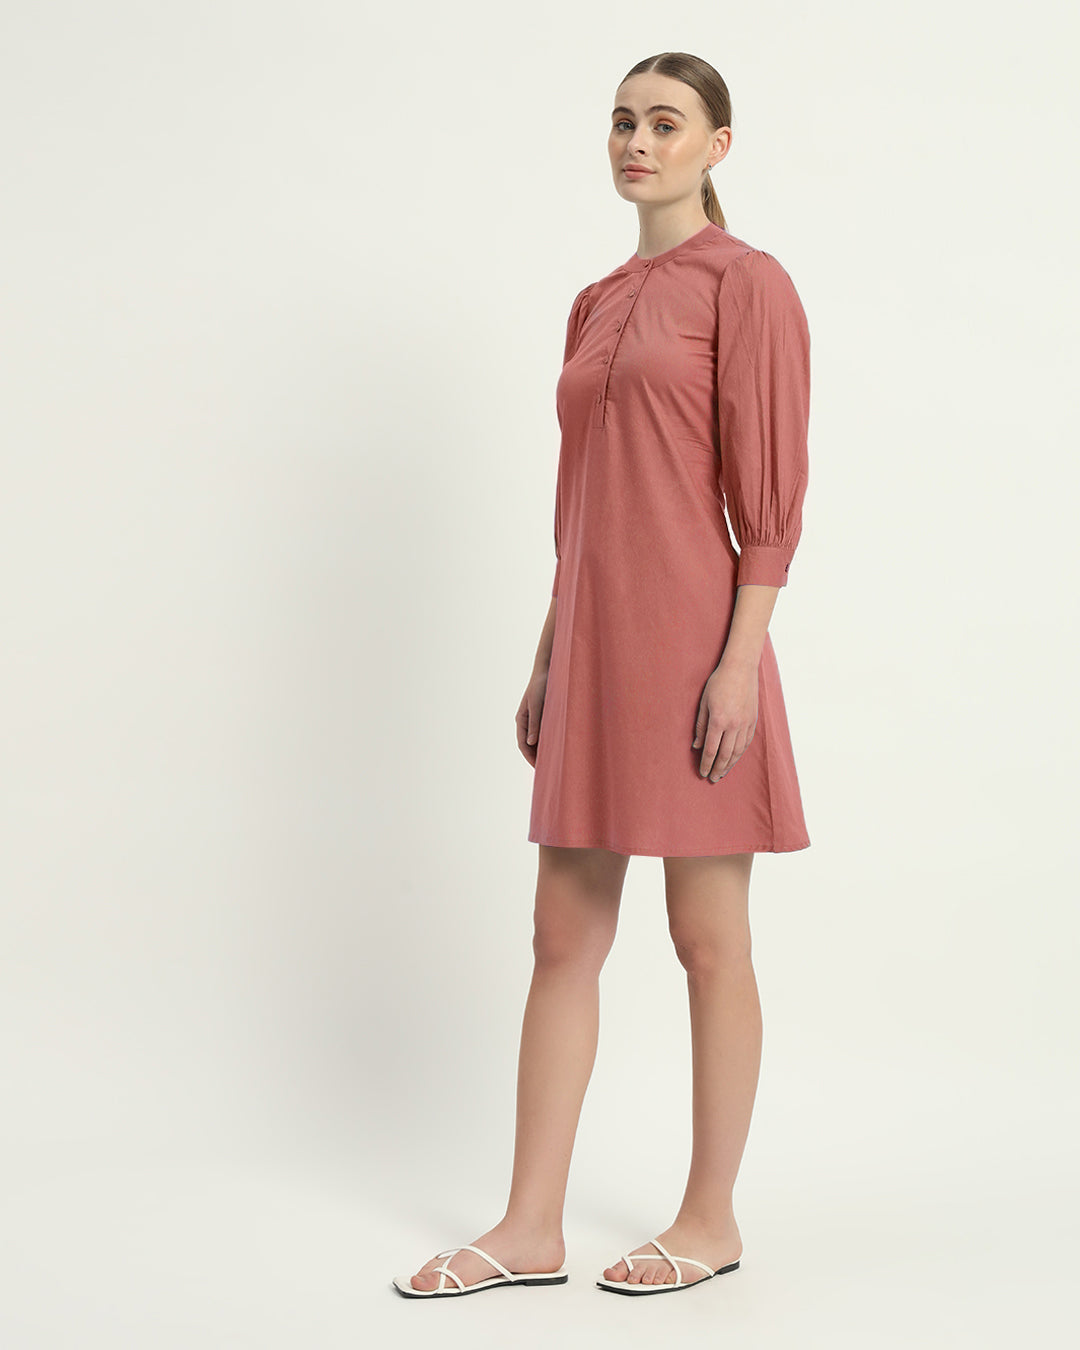 The Ivory Pink Roslyn Cotton Dress